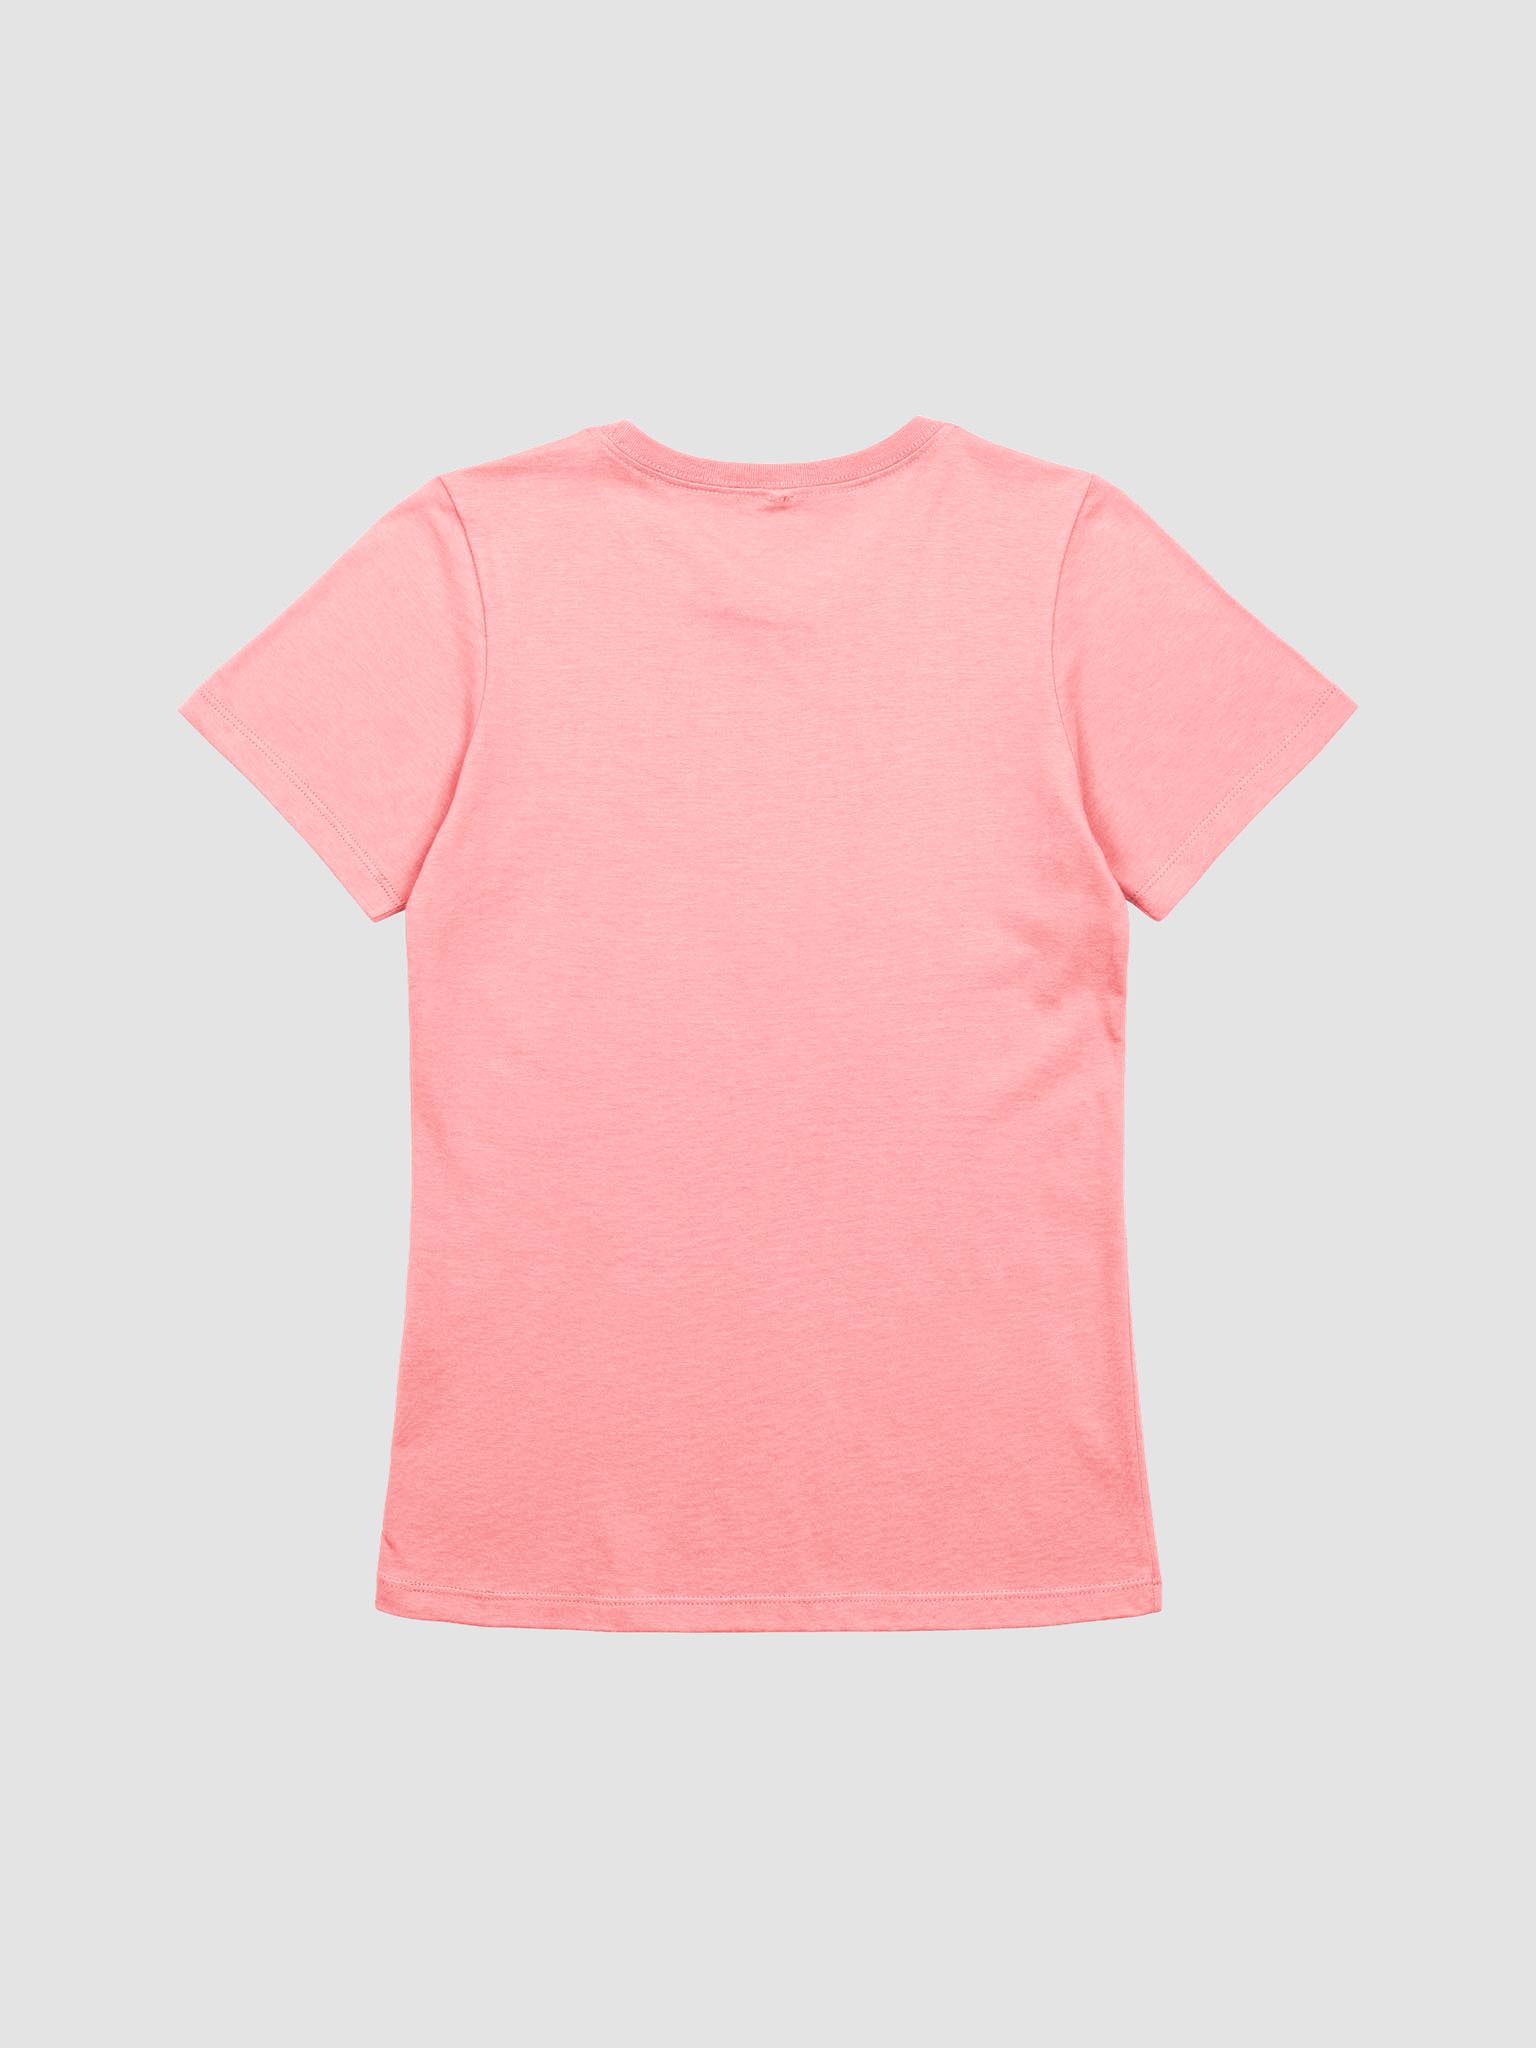 Fitted microfibre T-shirt - Light pink - Ladies